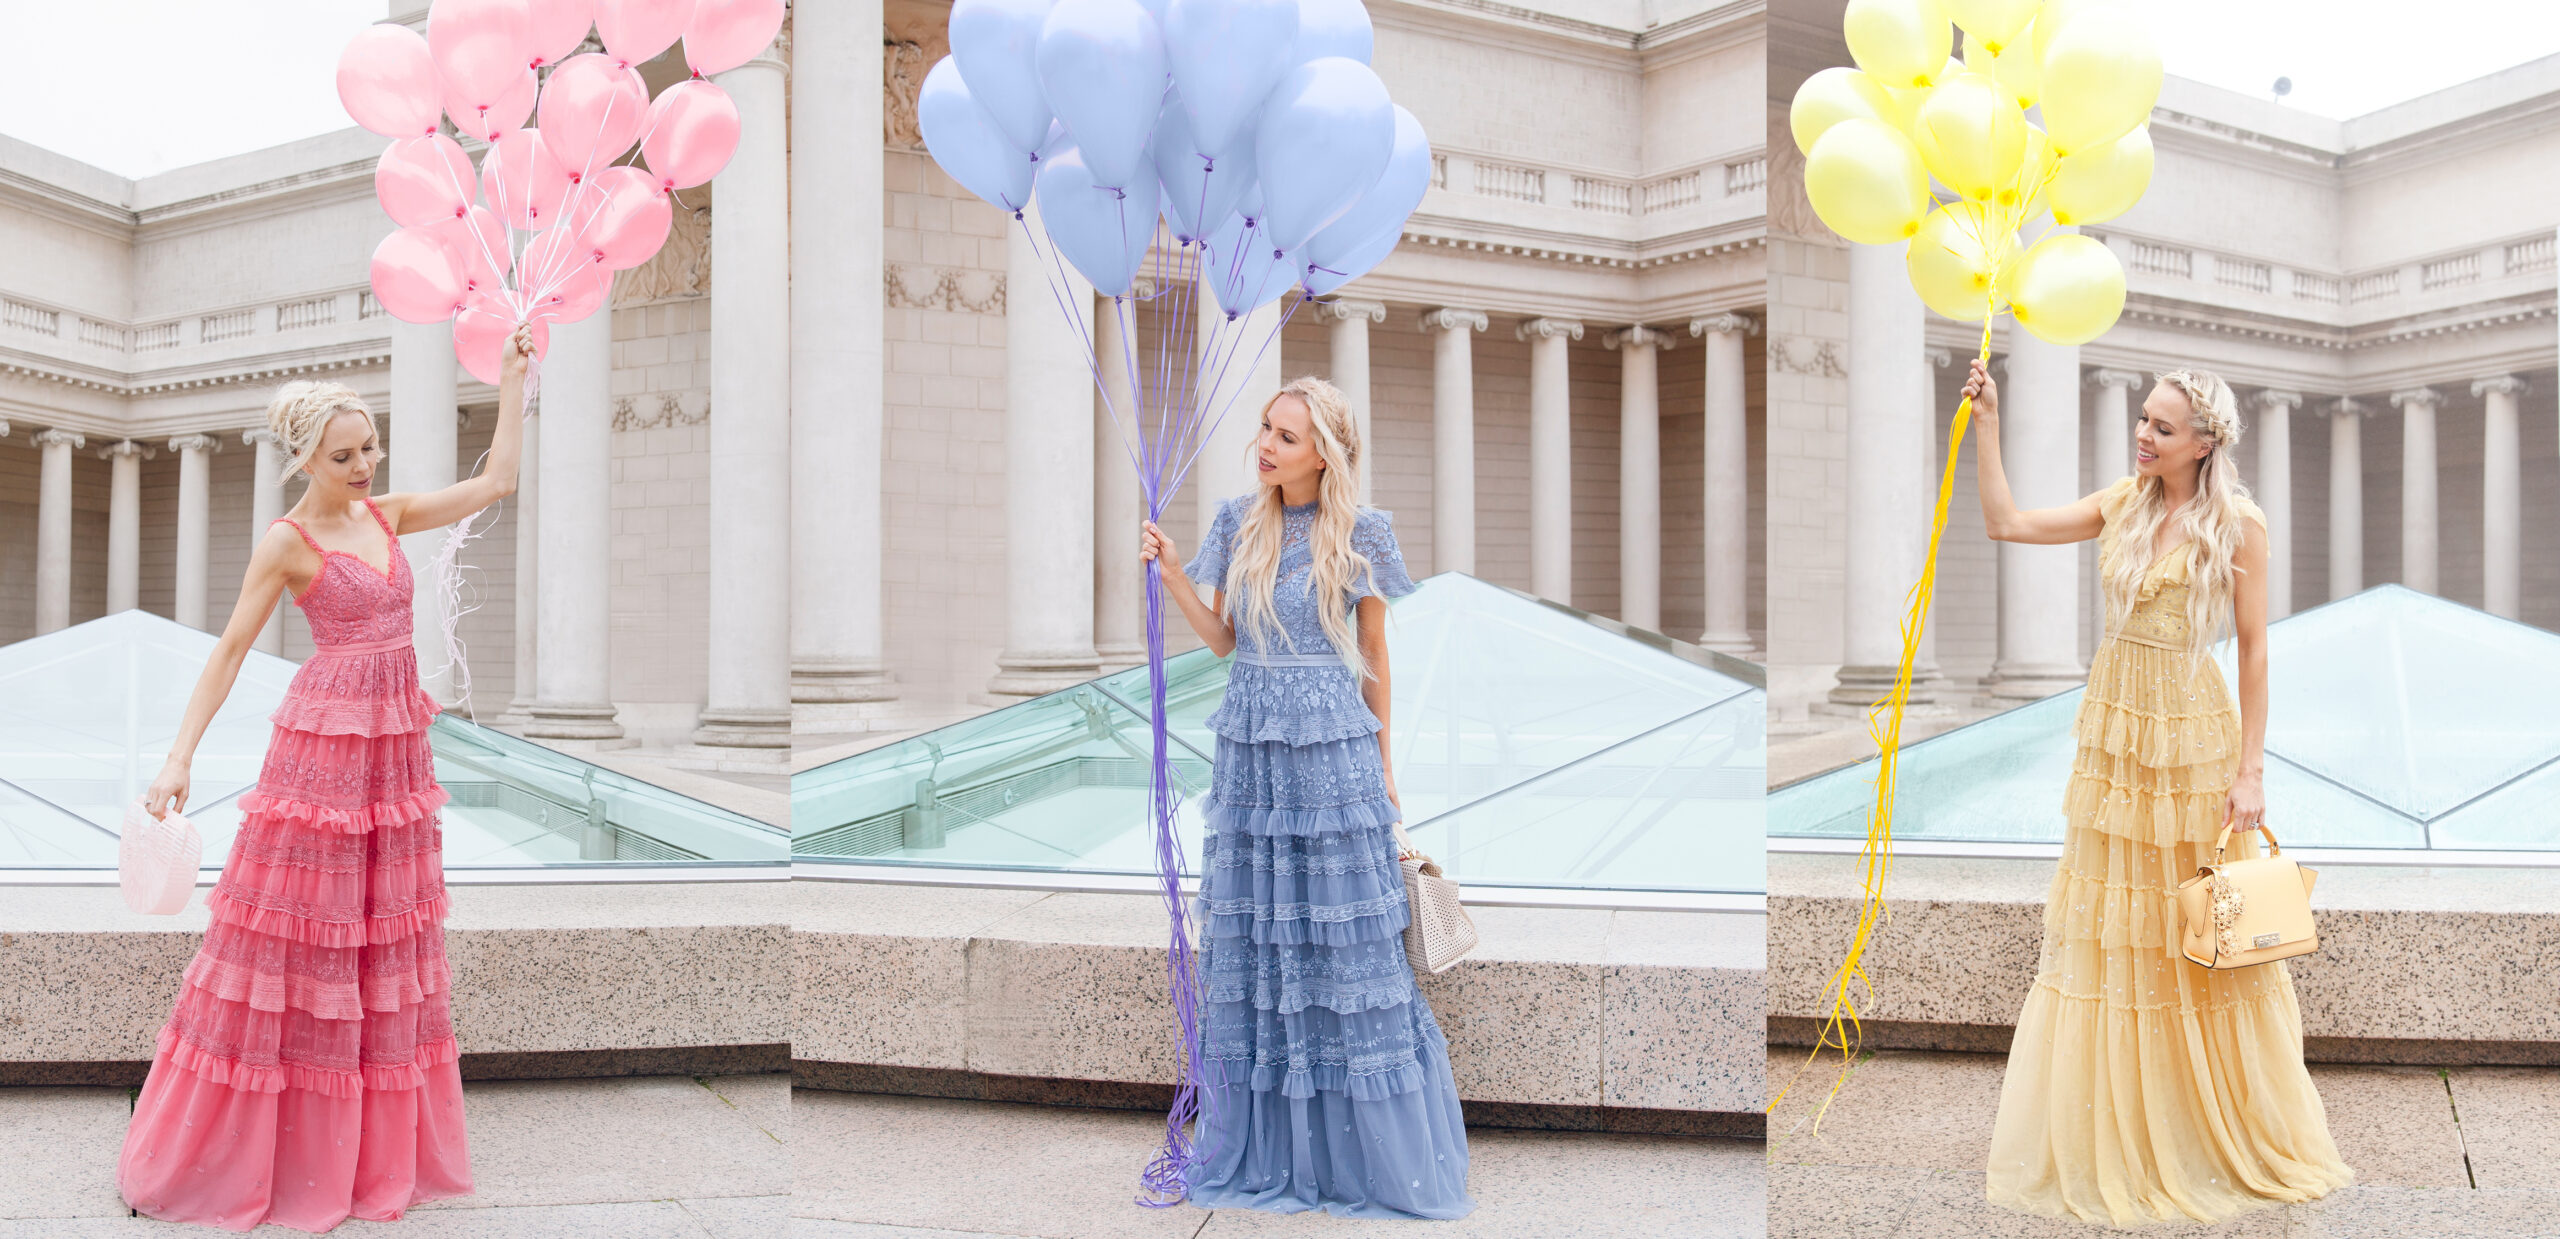 Top San Francisco fashion blog, Lombard and Fifth, features her tips on How to Ebay effectively: image of a blonde woman wearing a stunning maxi dress found on Ebay